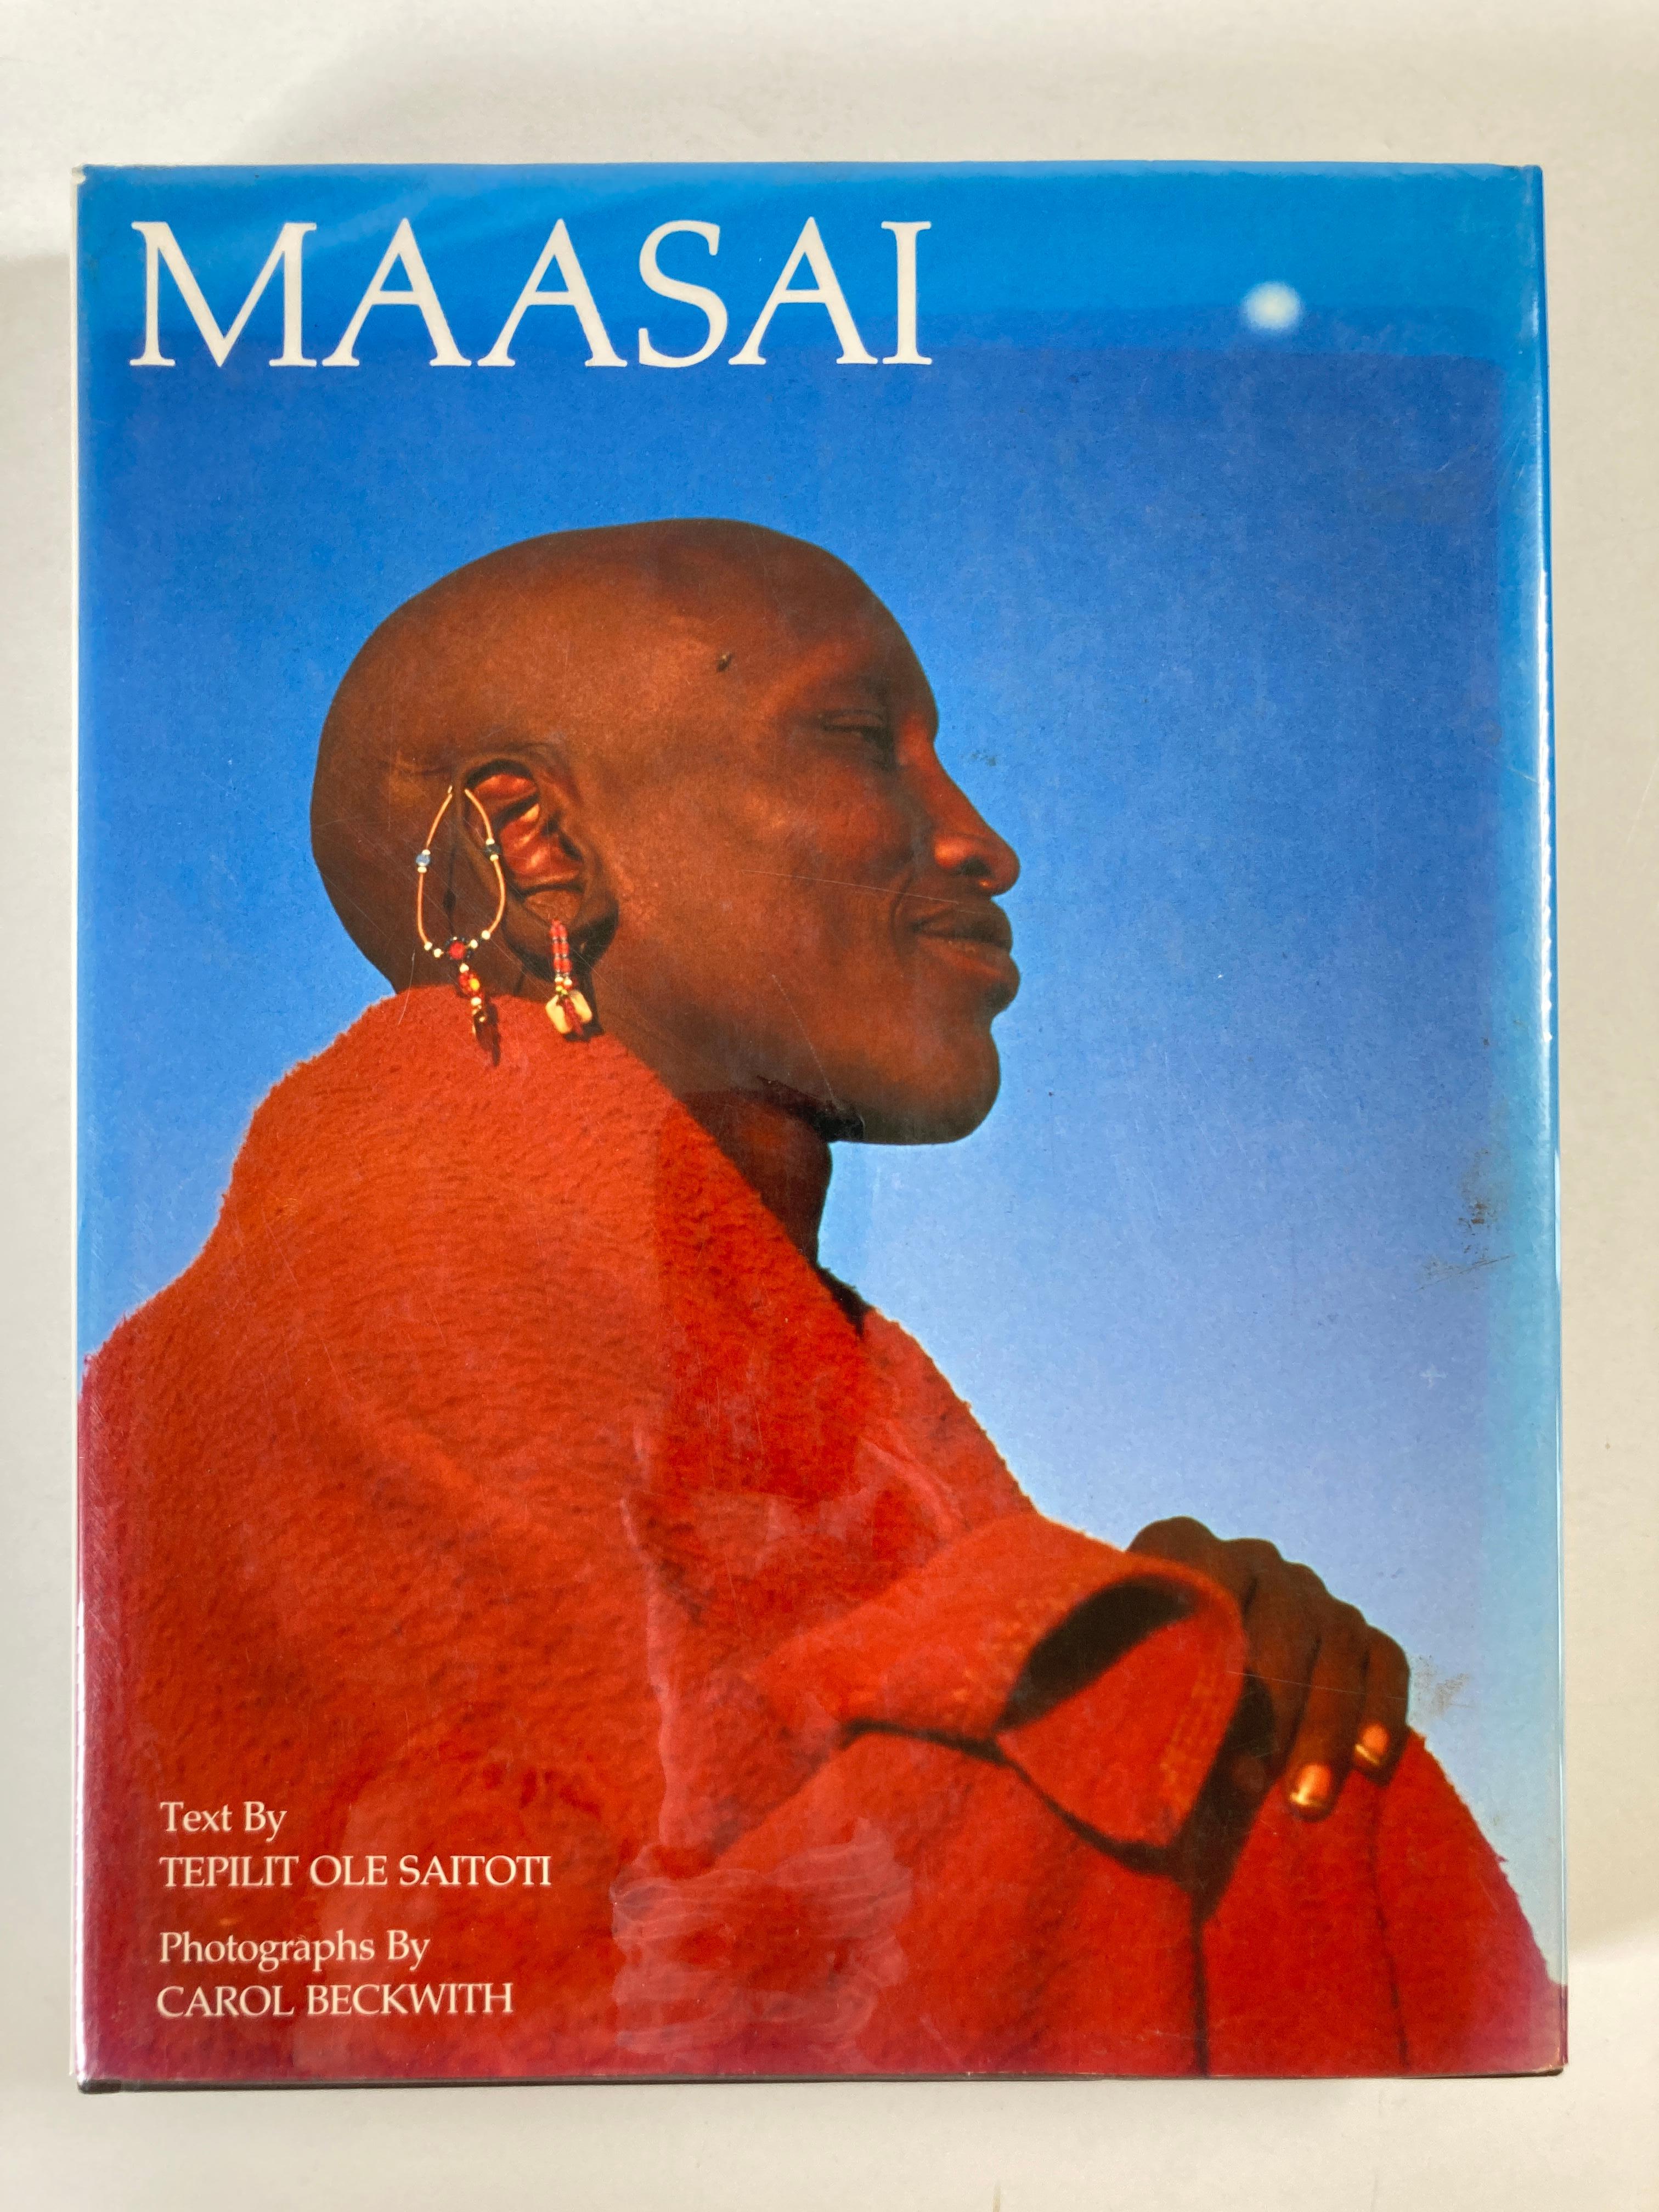 Vintage Book: Maasai by Teplit Ole Saitoti Hardcover book
Maasai Saitoti, Tepilit Ole, Beckwith, Carol.
The author recounts ancient Maasai legends and songs, and powerfully describes the vivid ceremonies that mark the passages in Maasai